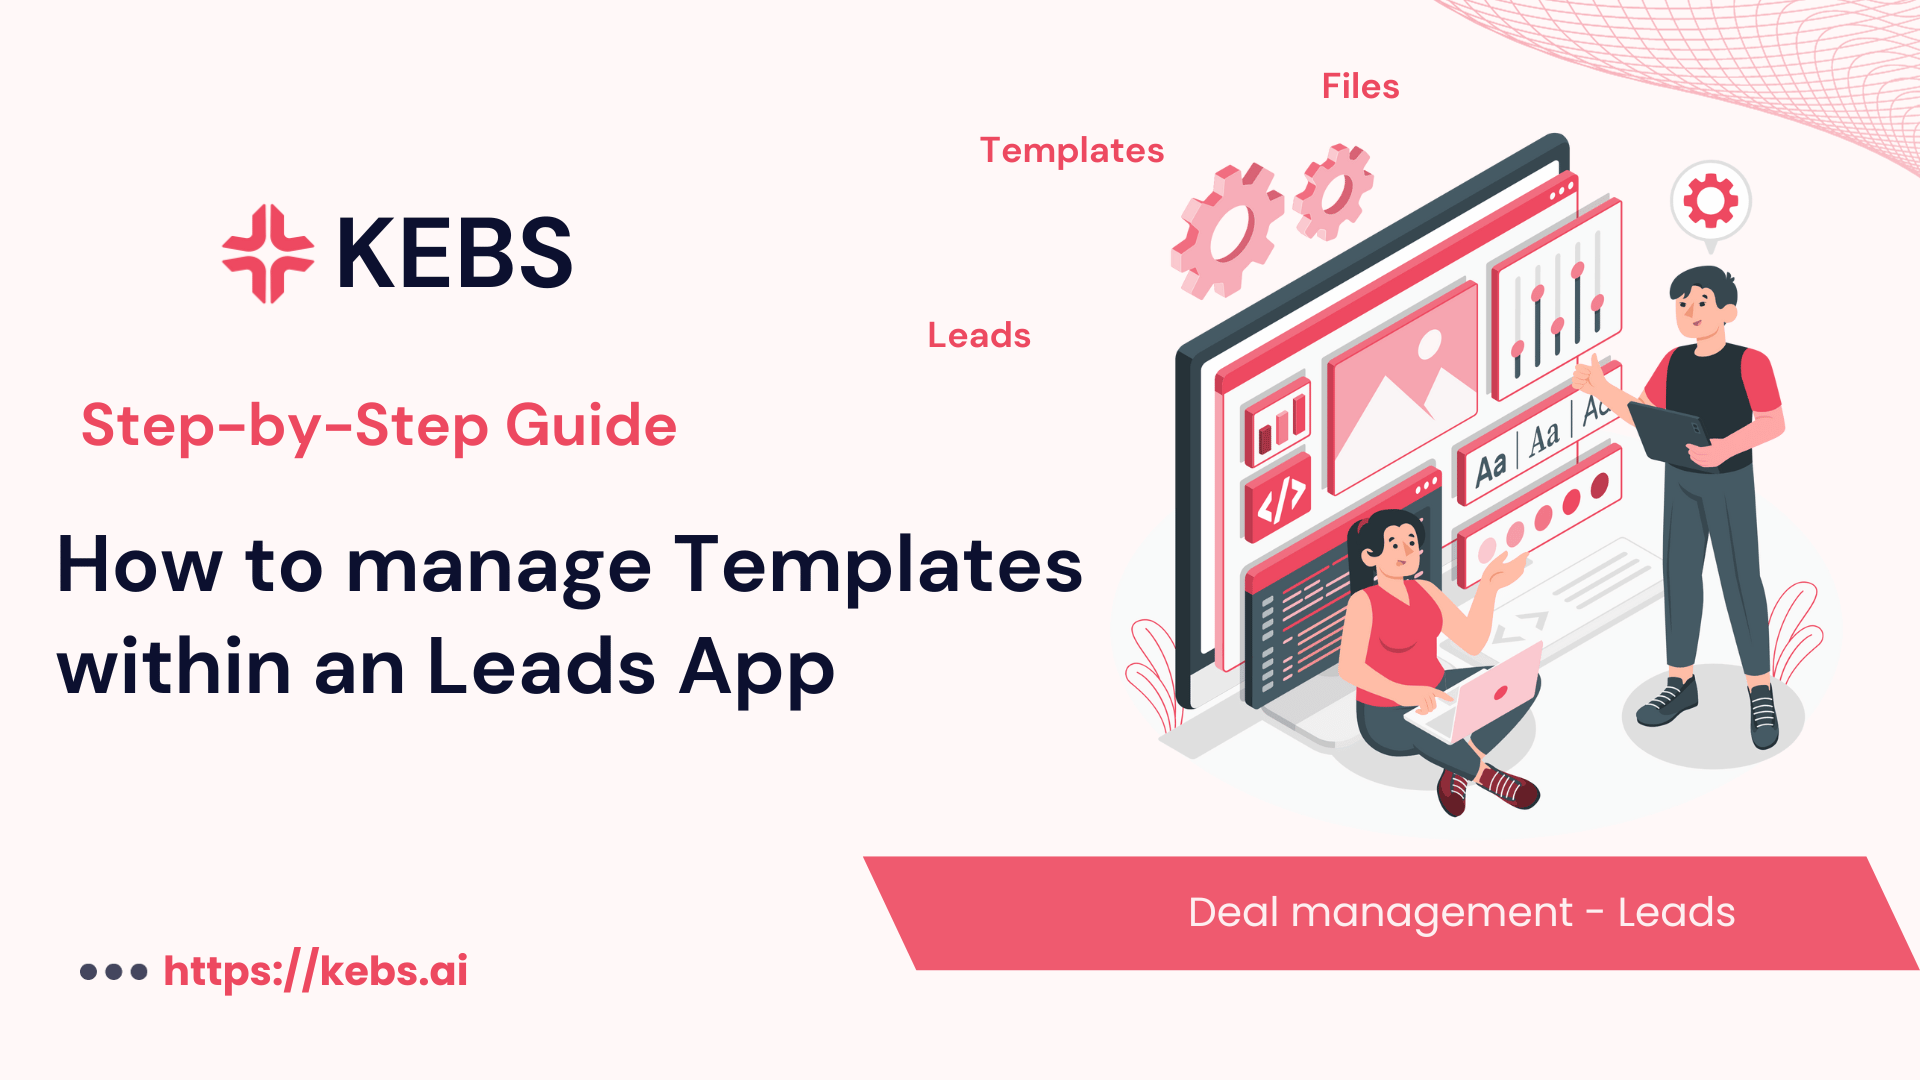 How to manage Templates within an Leads App